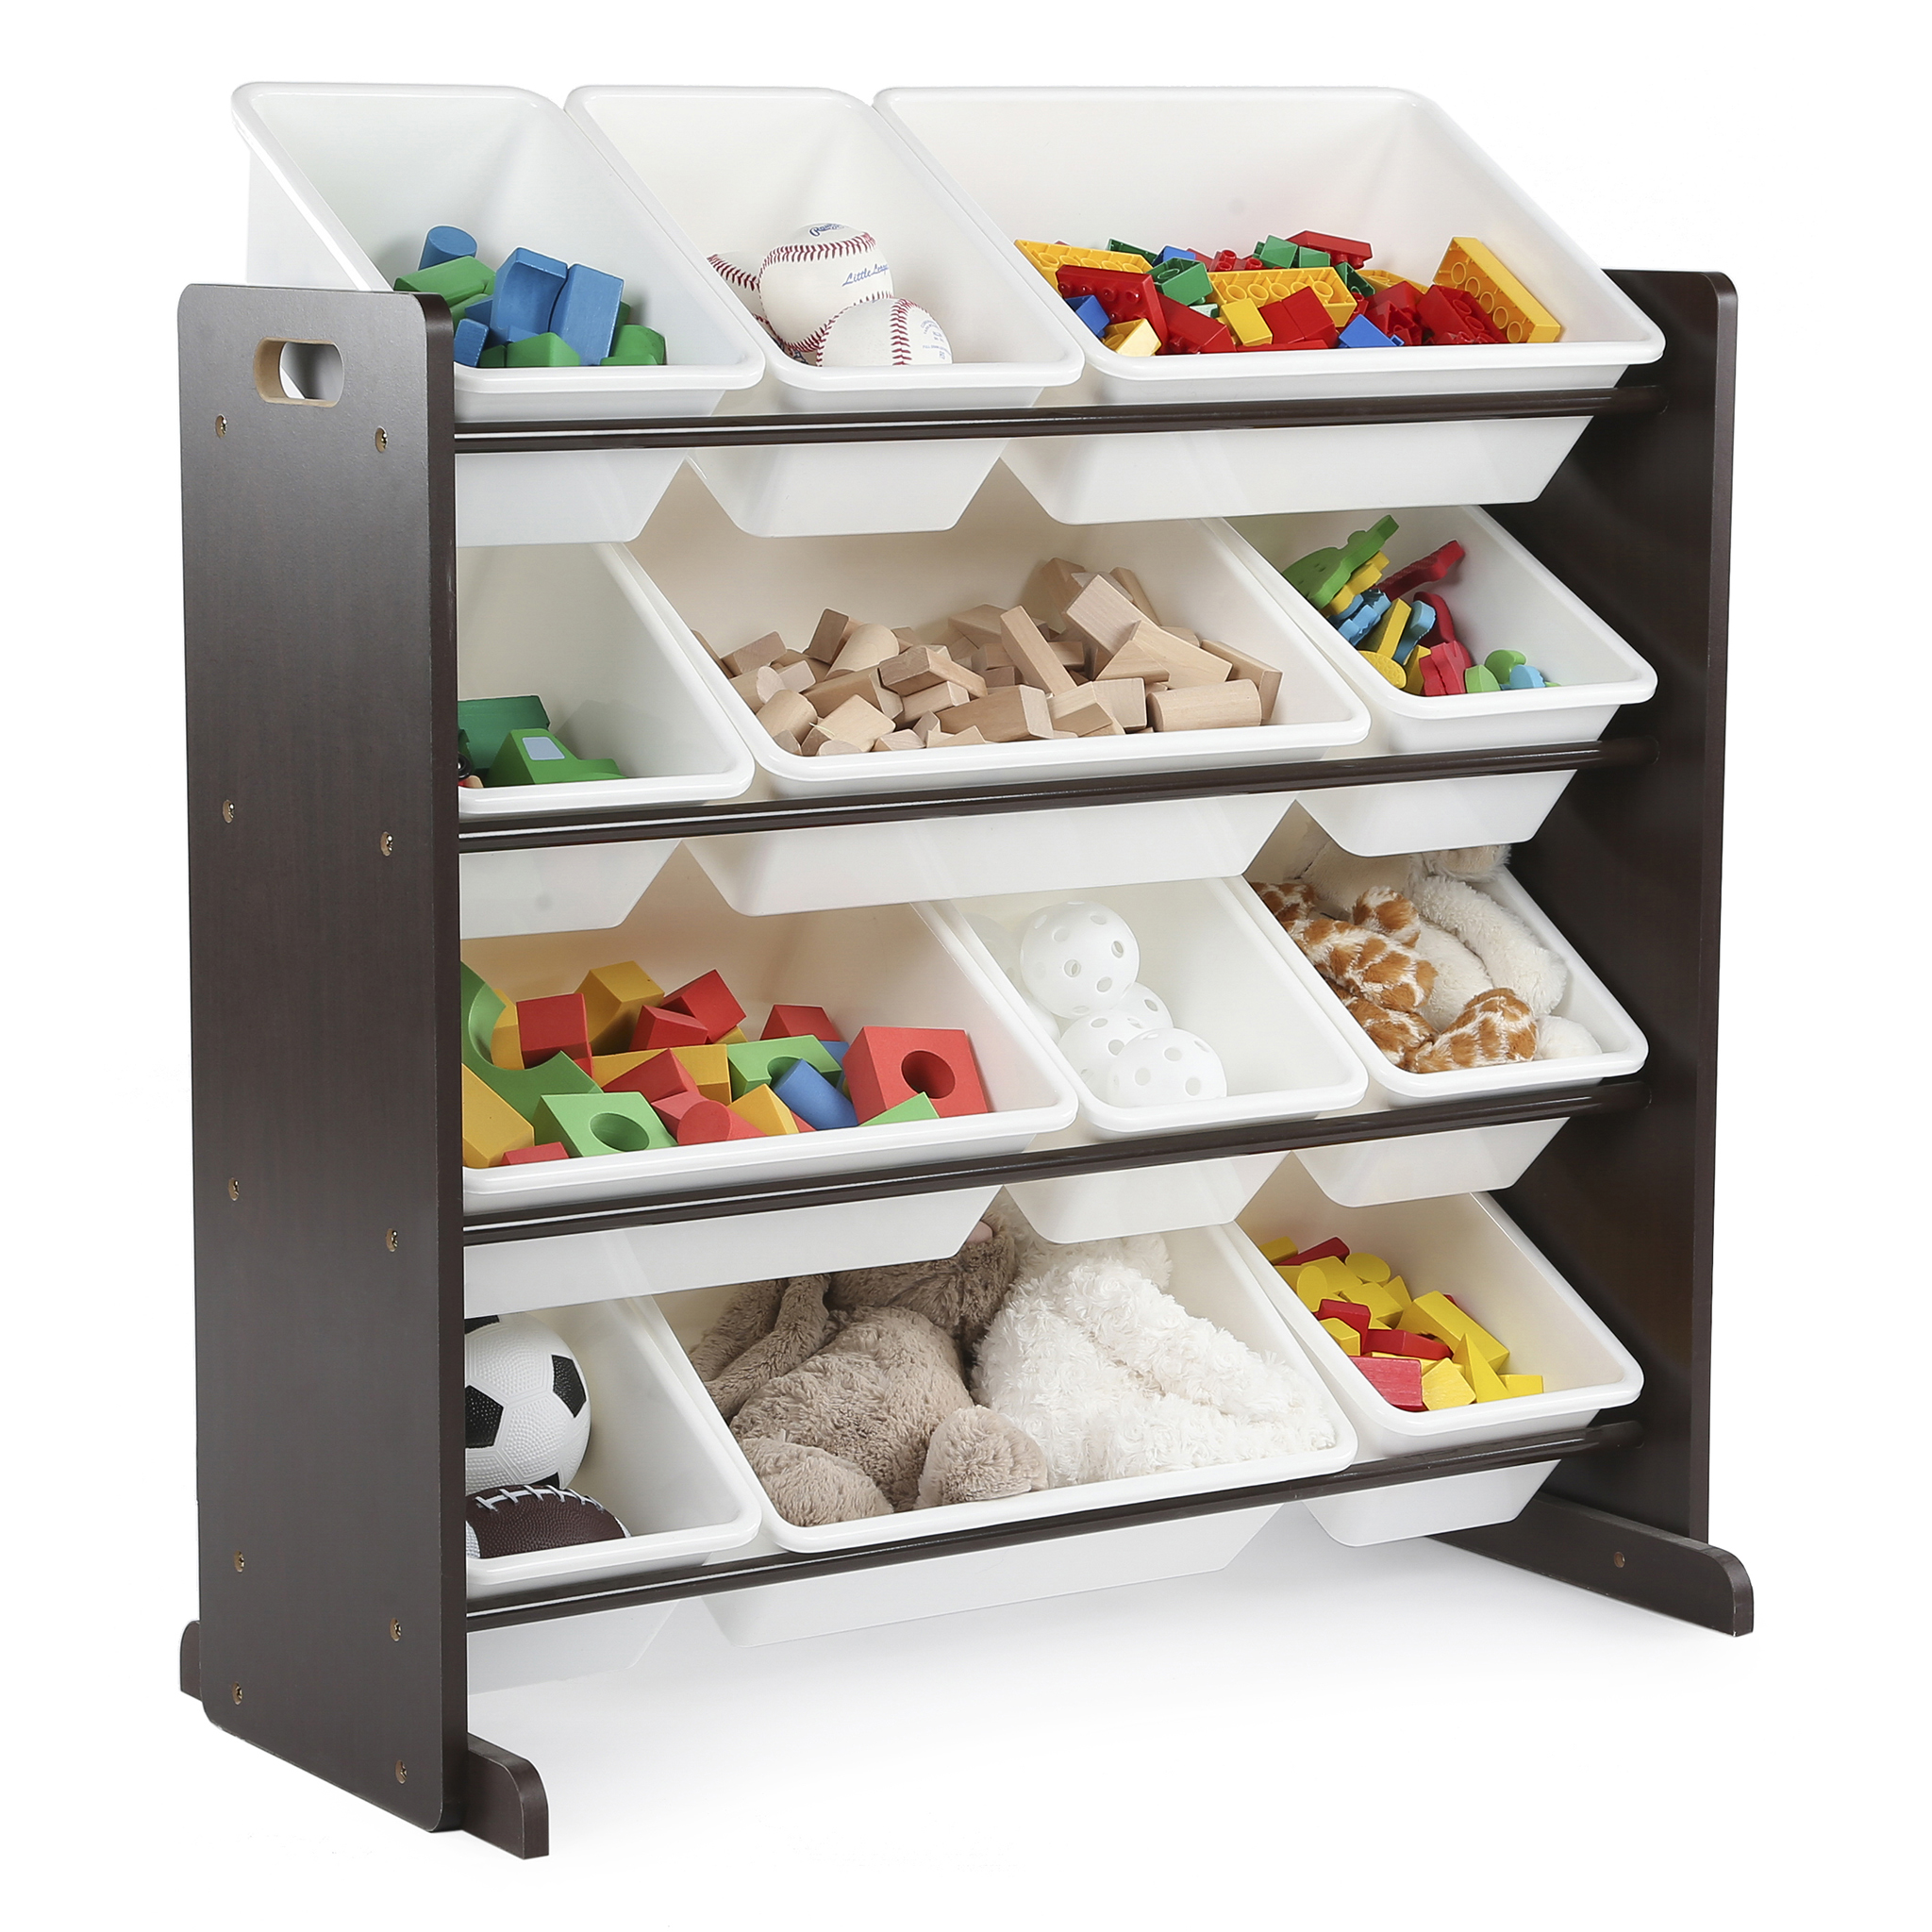 Humble Crew Children Plastic Organizing Rack with 12 Bins, Espresso and White - image 4 of 9